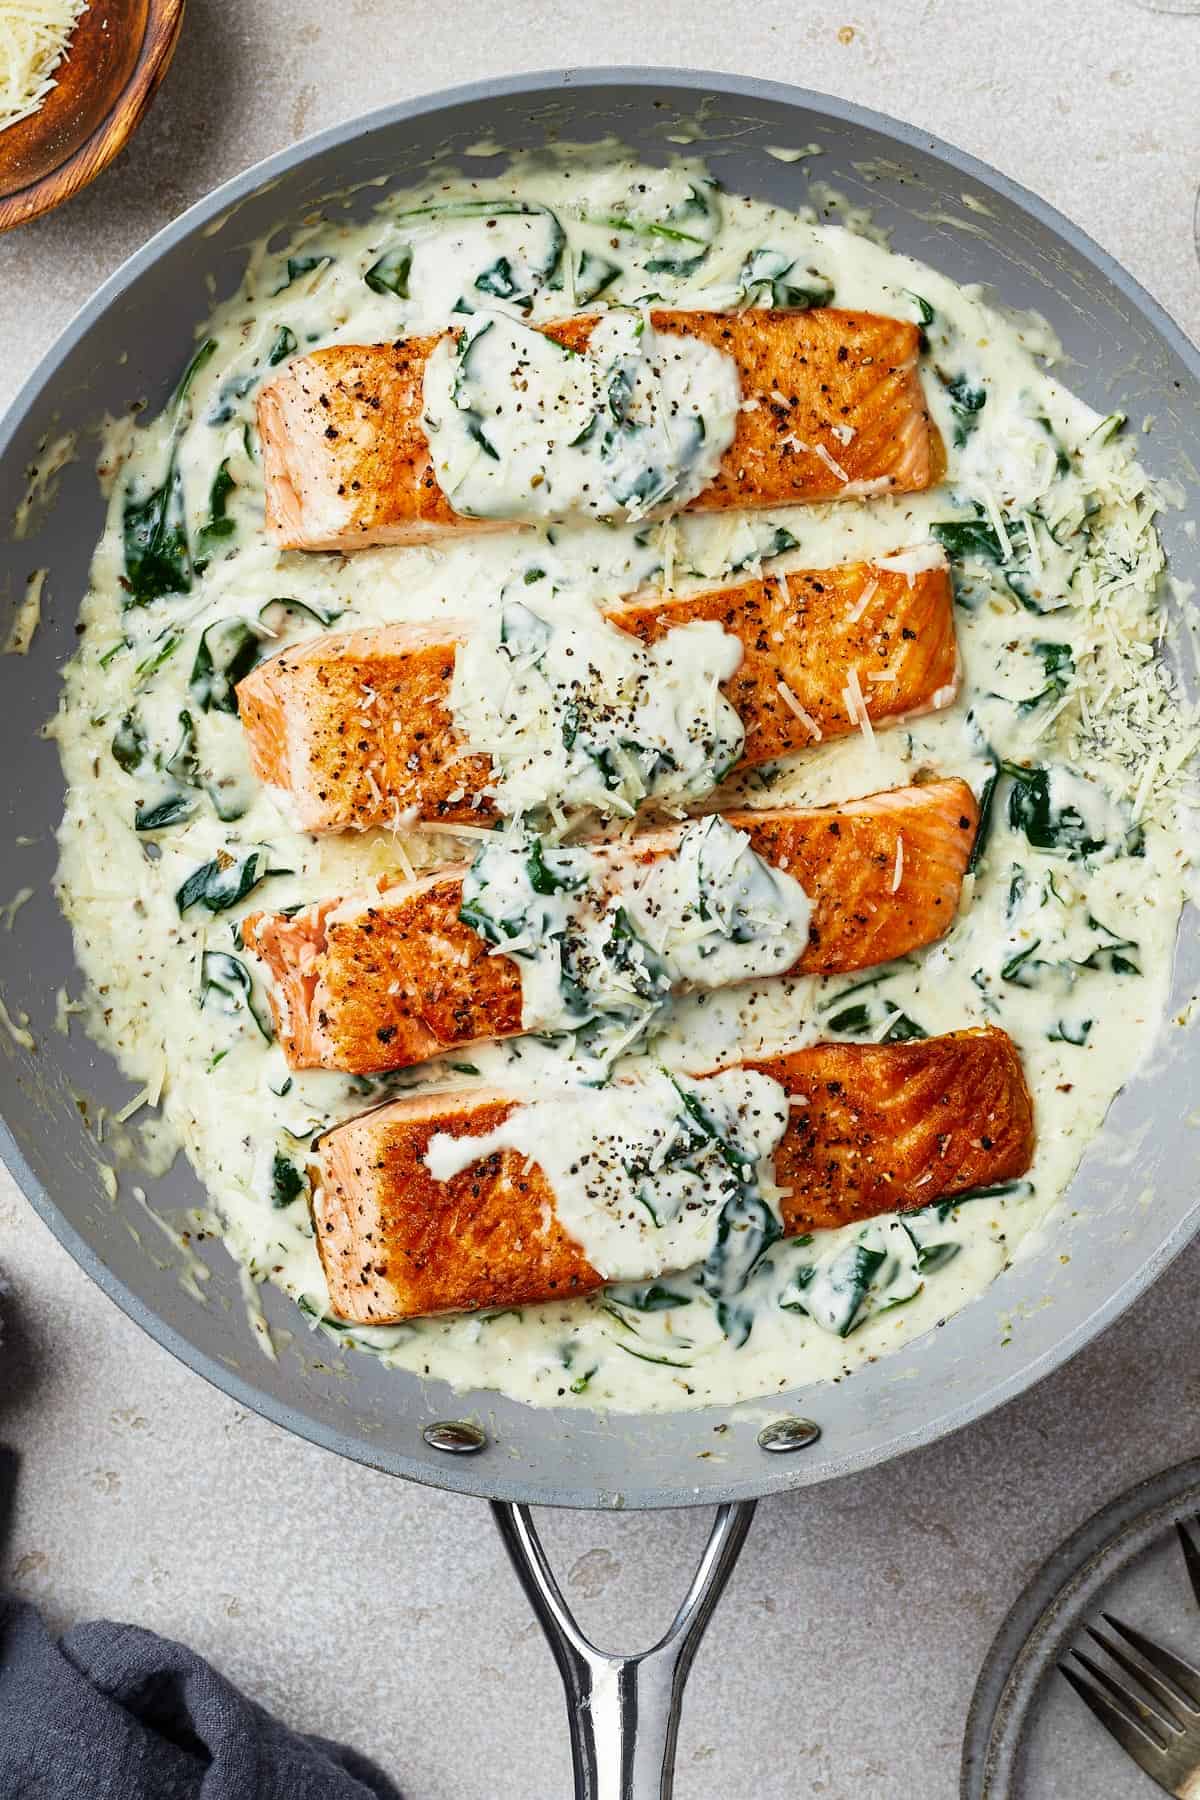 Salmon fillets in creamy spinach sauce in a gray nonstick skillet.